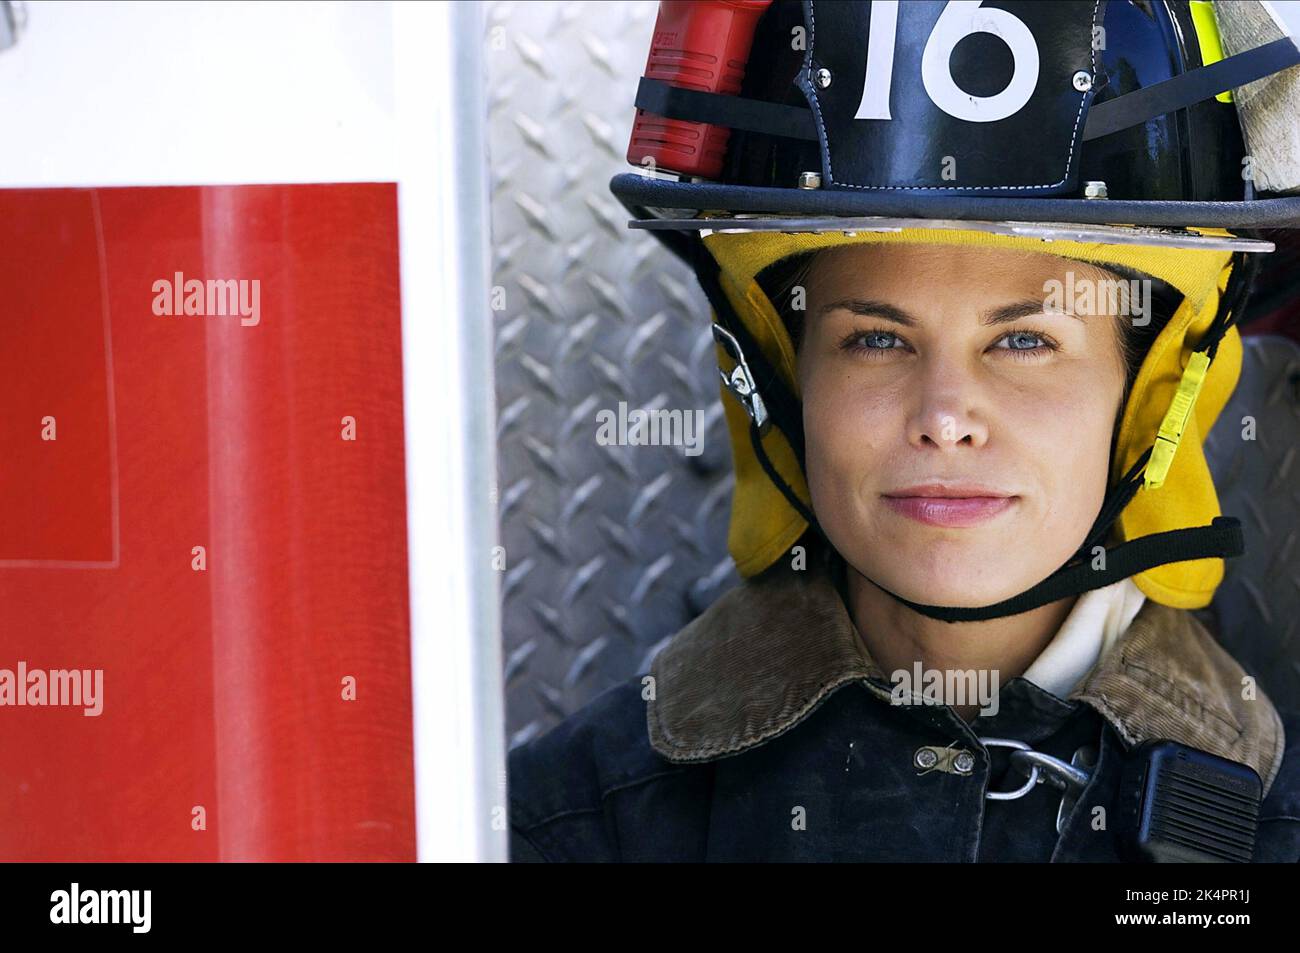 BROOKE BURNS, TRIAL BY FIRE, 2008 Stock Photo - Alamy